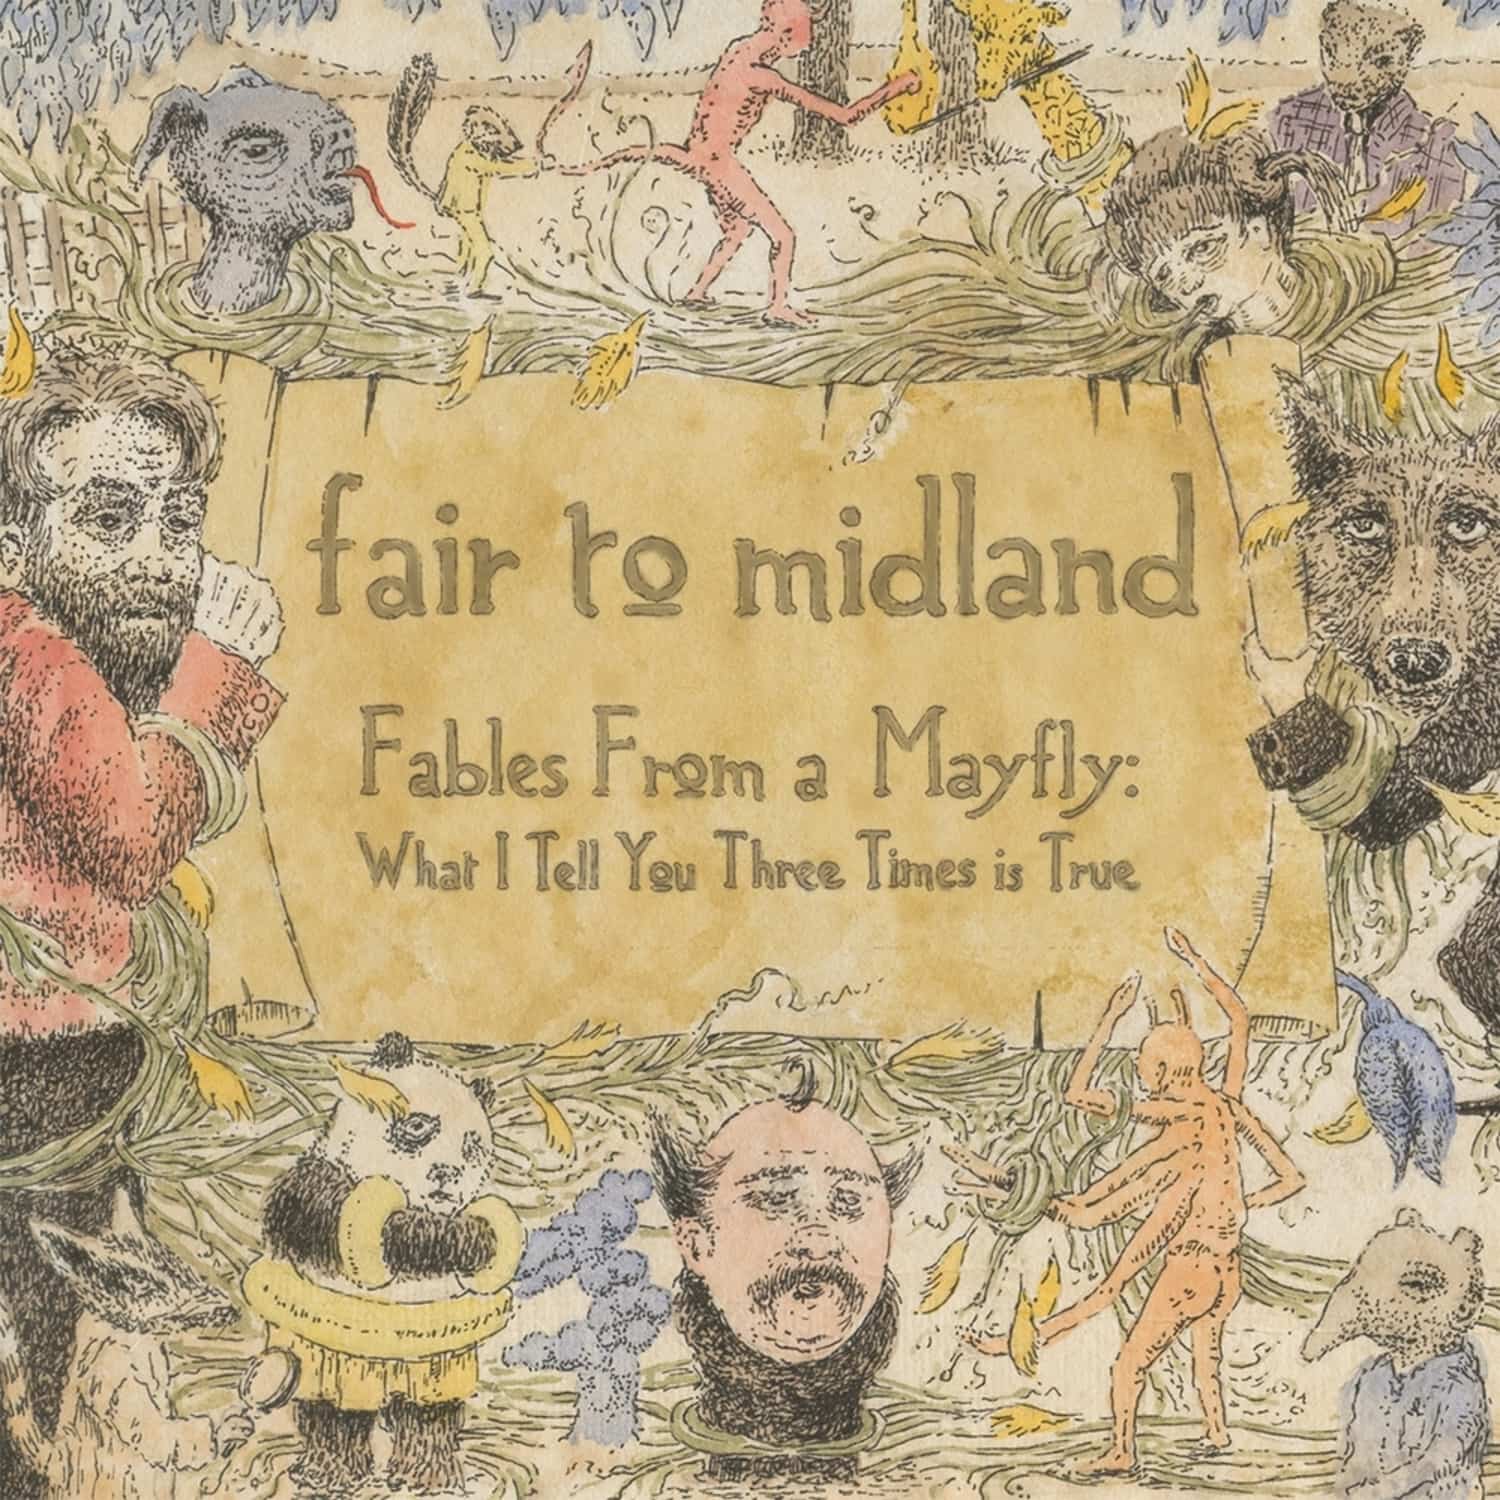 Fair To Midland - FABLES FROM A MAYFLY: WHAT I TELL YOU THREE TIMES 